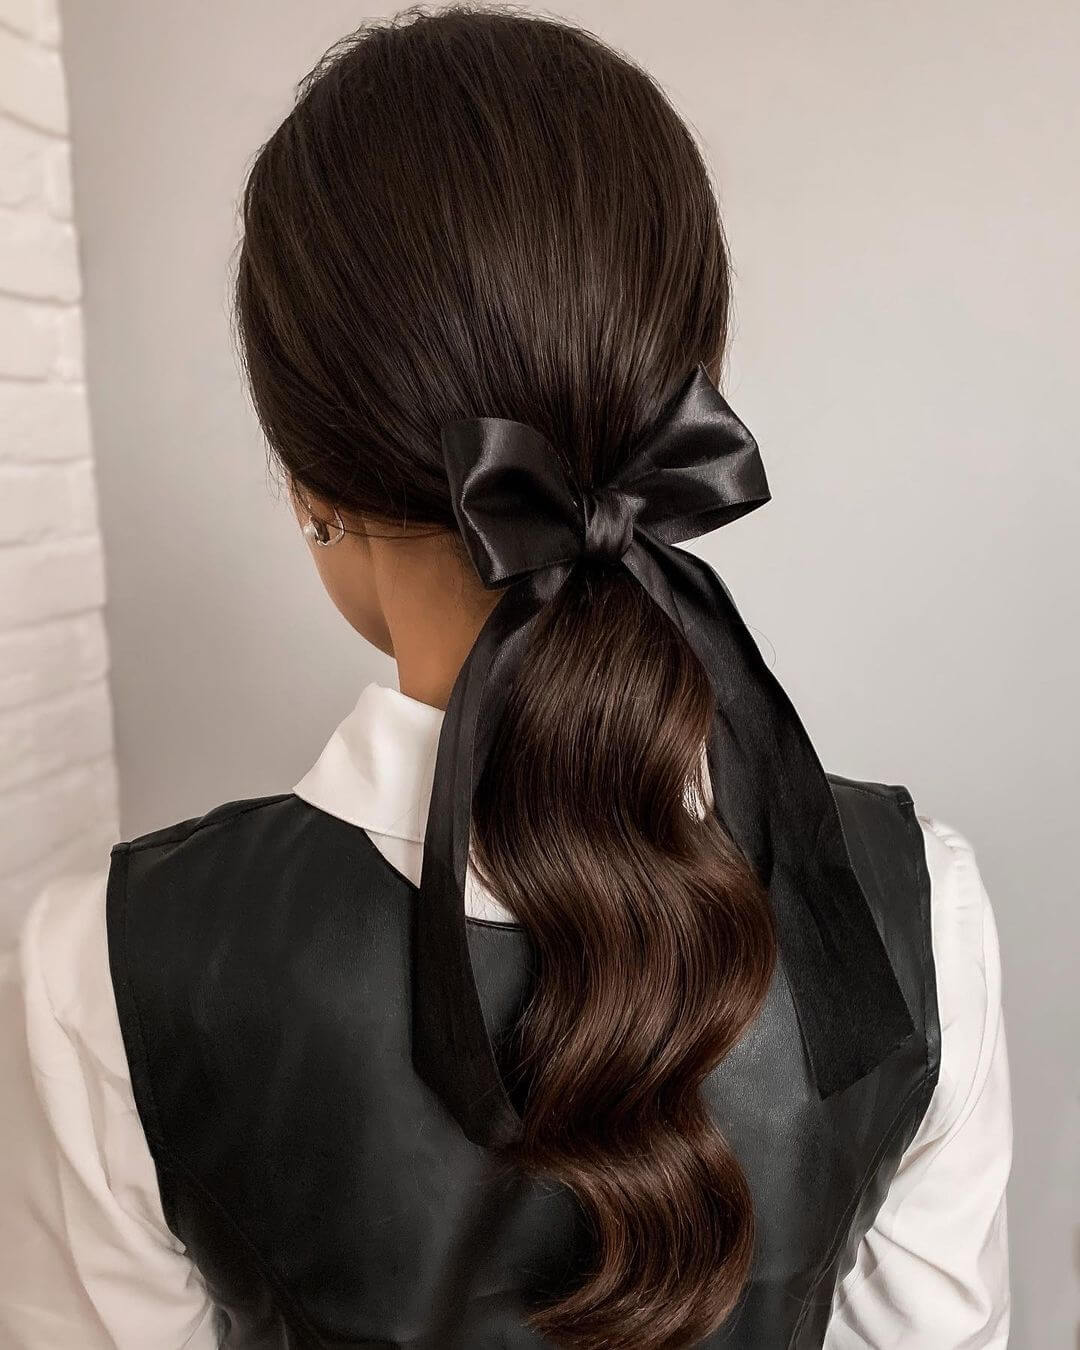 42 Formal Hairstyles for Long Hair You Can Try  StyleSeat